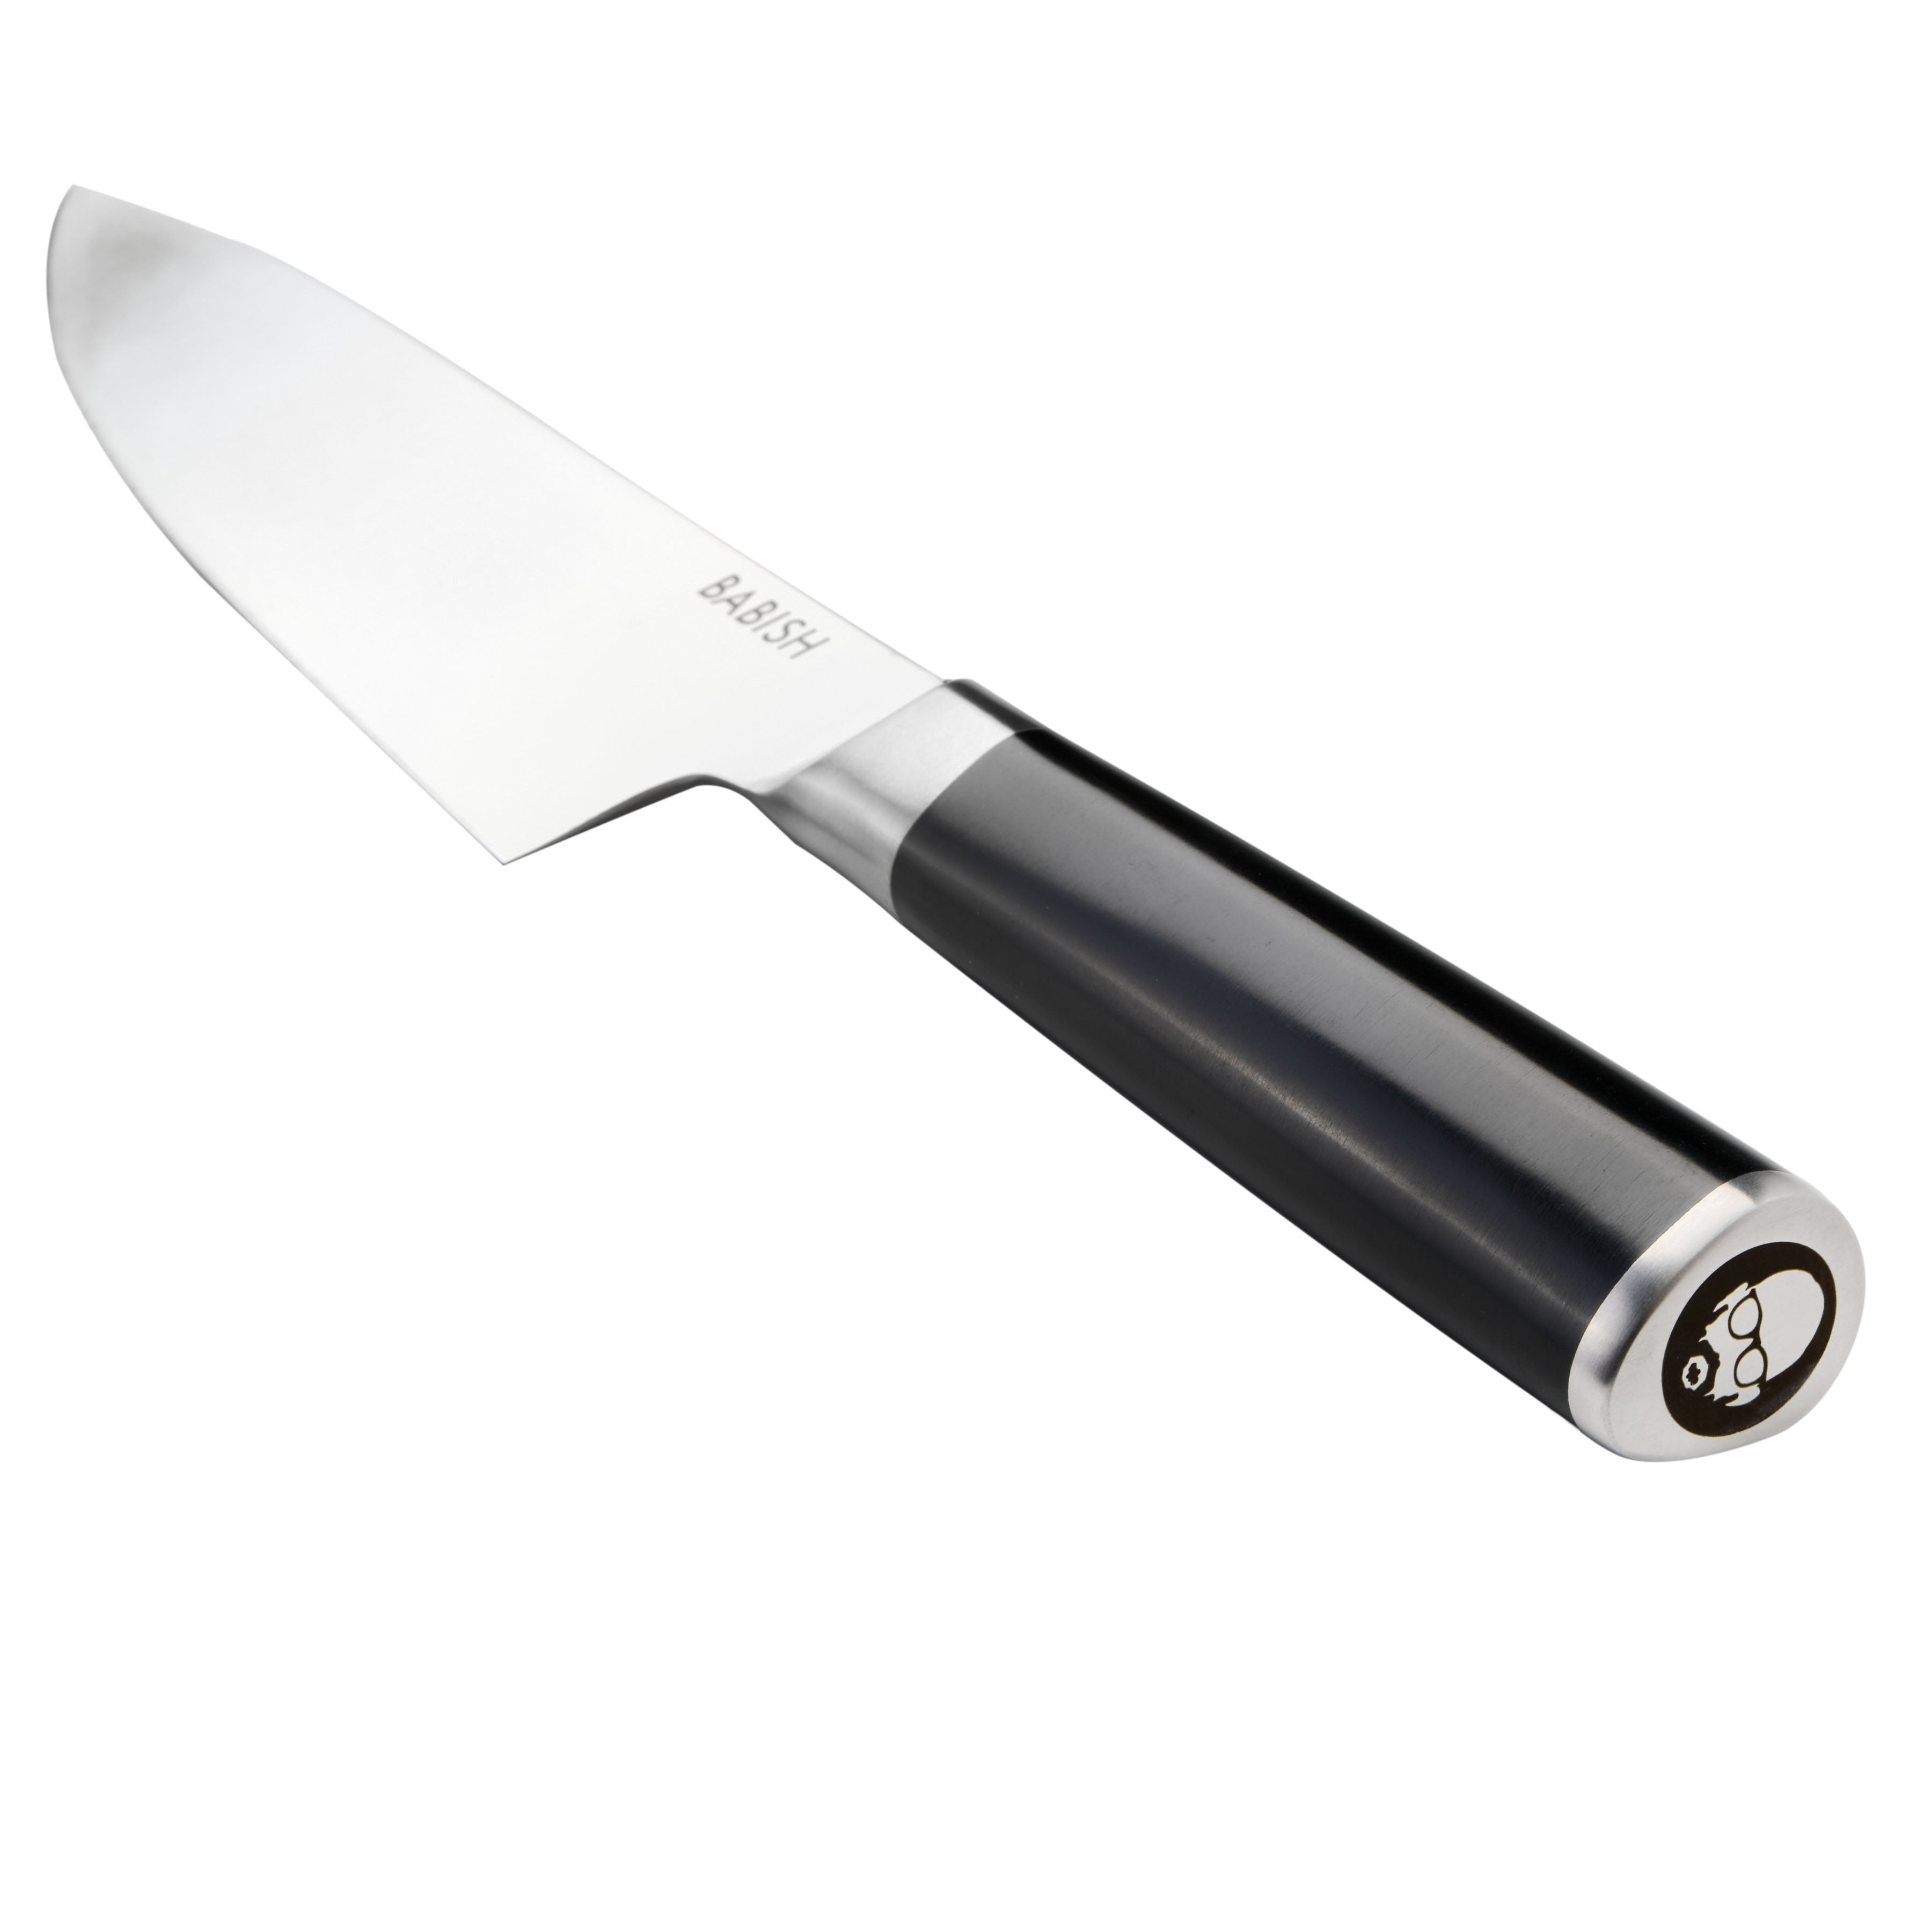 Babish High-Carbon 1.4116 German Steel Cutlery, 7.5 Clef (Cleaver + Chef)  Kitchen Knife, Good Housekeeping Standout Knife of 2022: Home & Kitchen 